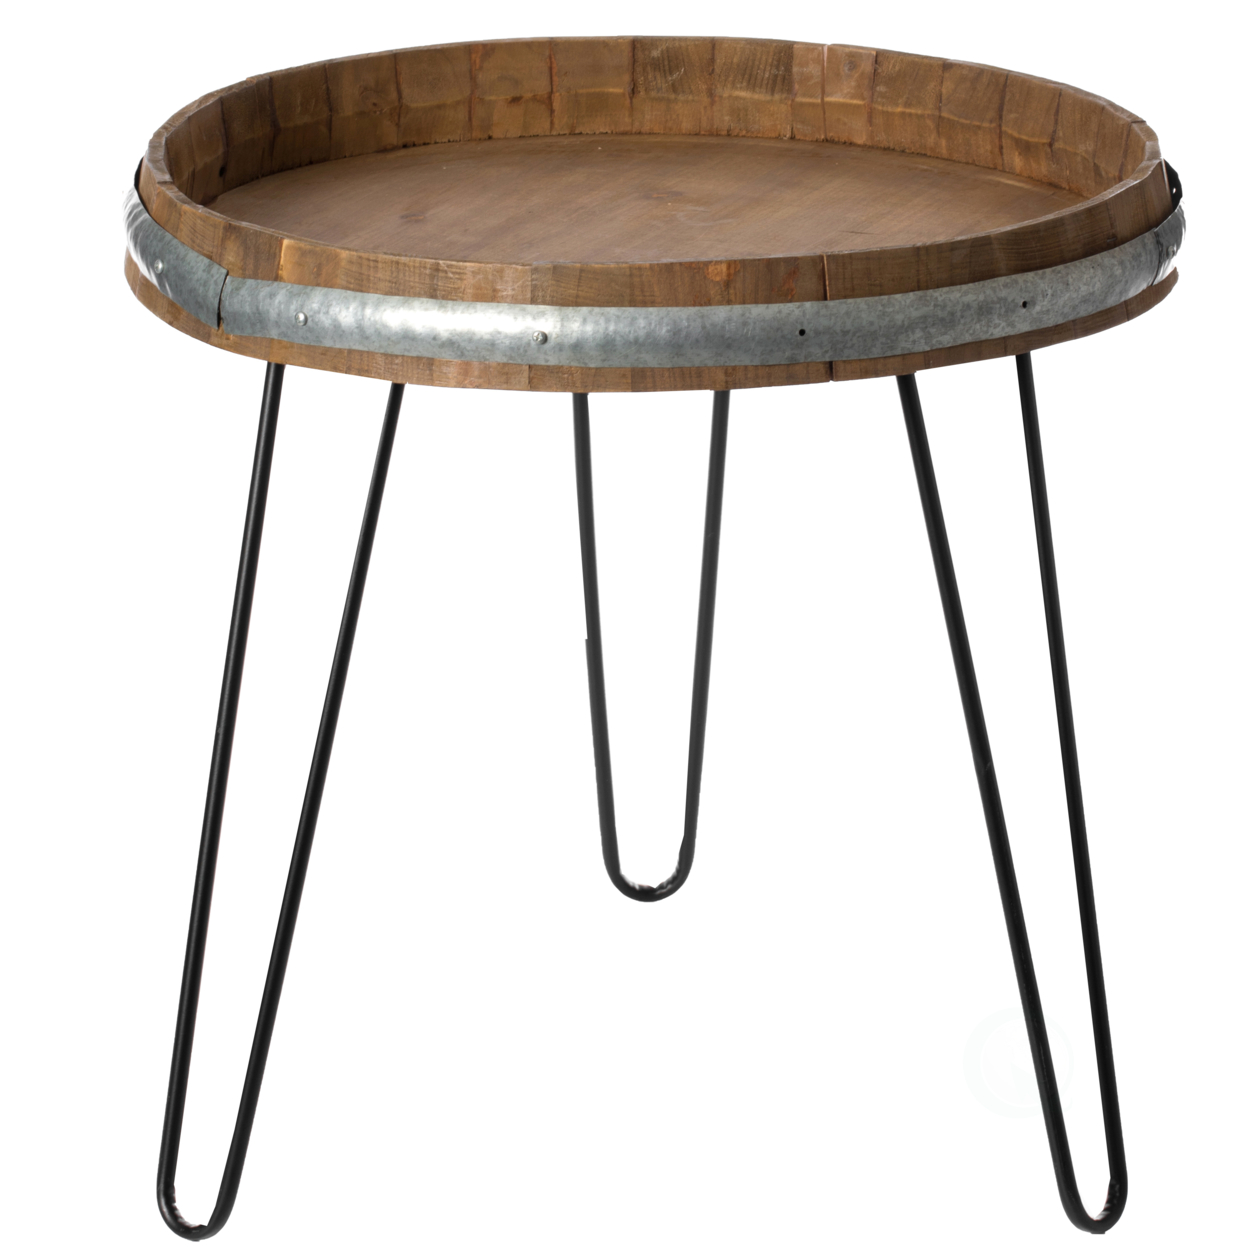 Wooden Wine Barrel Head End Table Accent Coffee Table